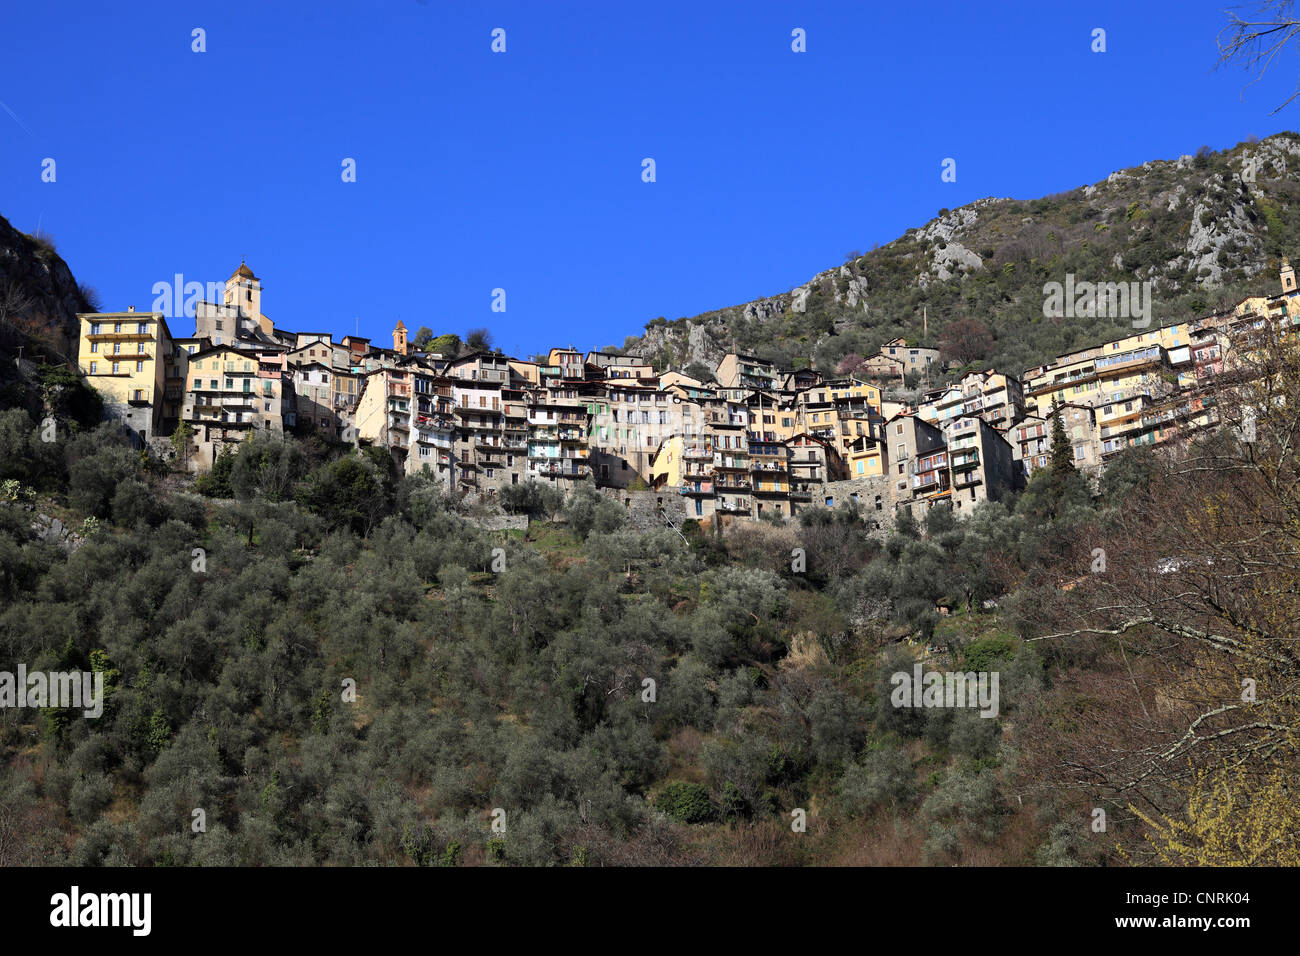 The perched village of Saorge in the Roya valley into the Mercantour ...